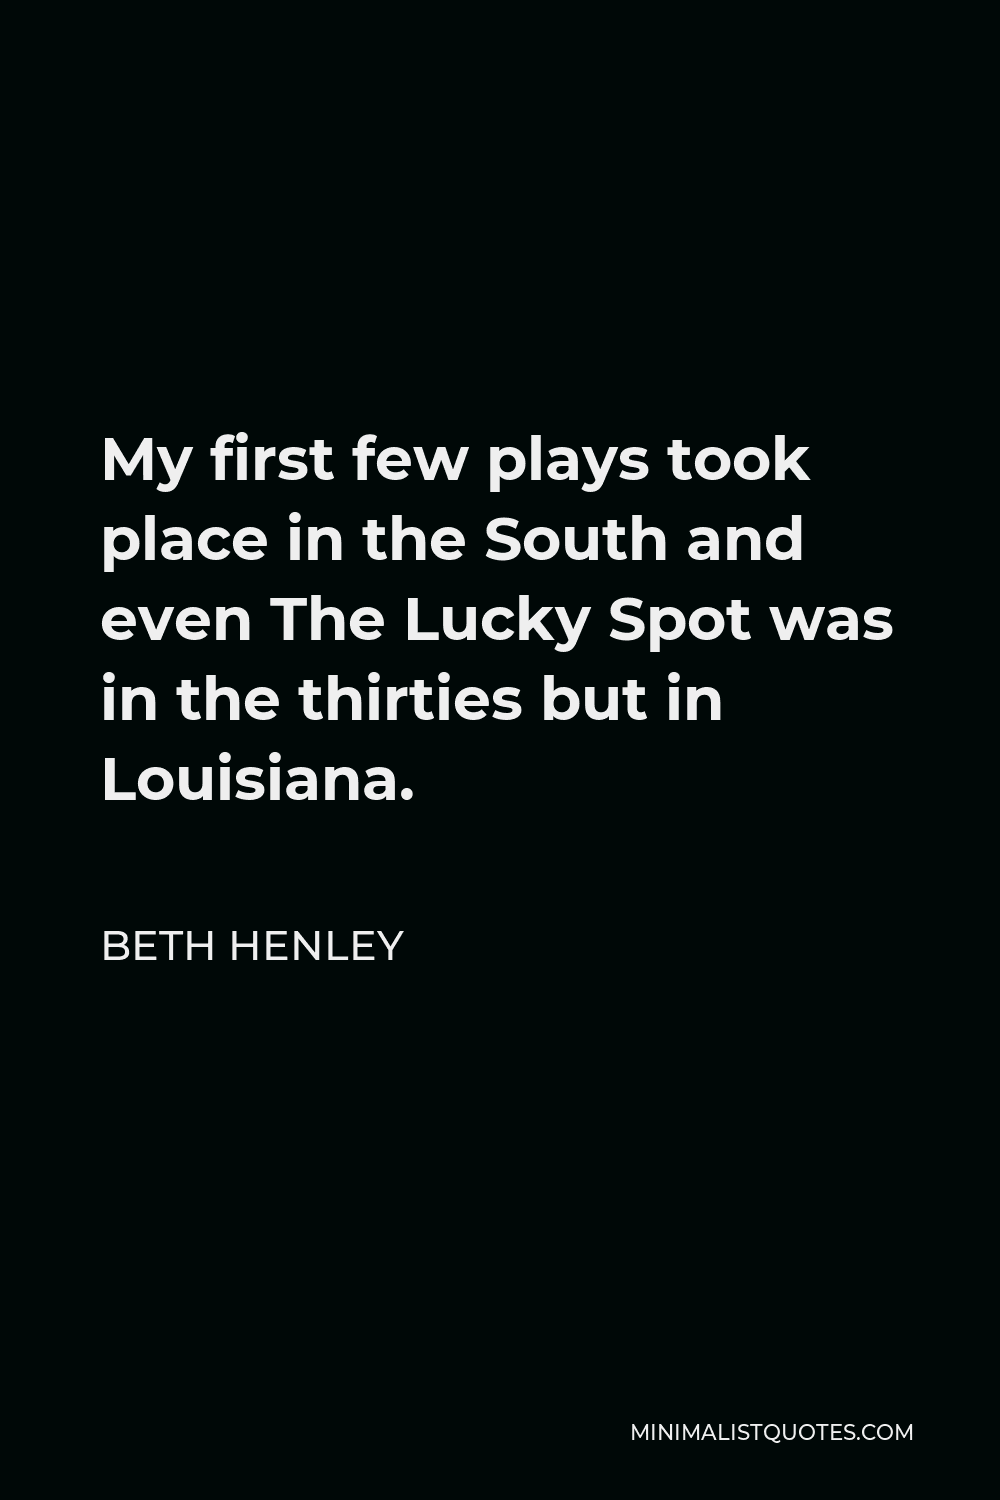 Beth Henley Quote - My first few plays took place in the South and even The Lucky Spot was in the thirties but in Louisiana.